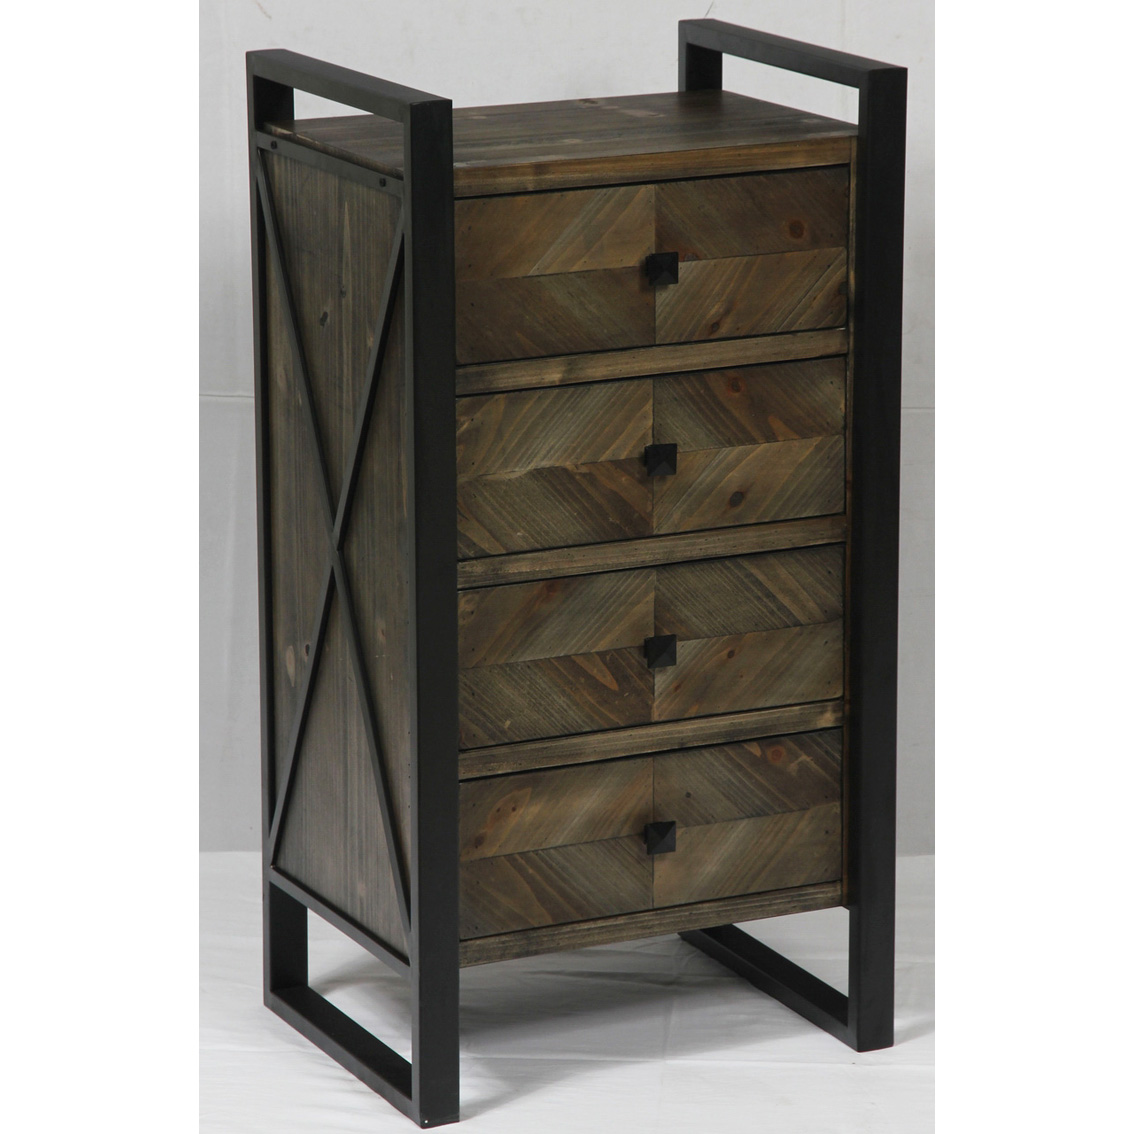 Heavy metal chest with 4 wood drawers